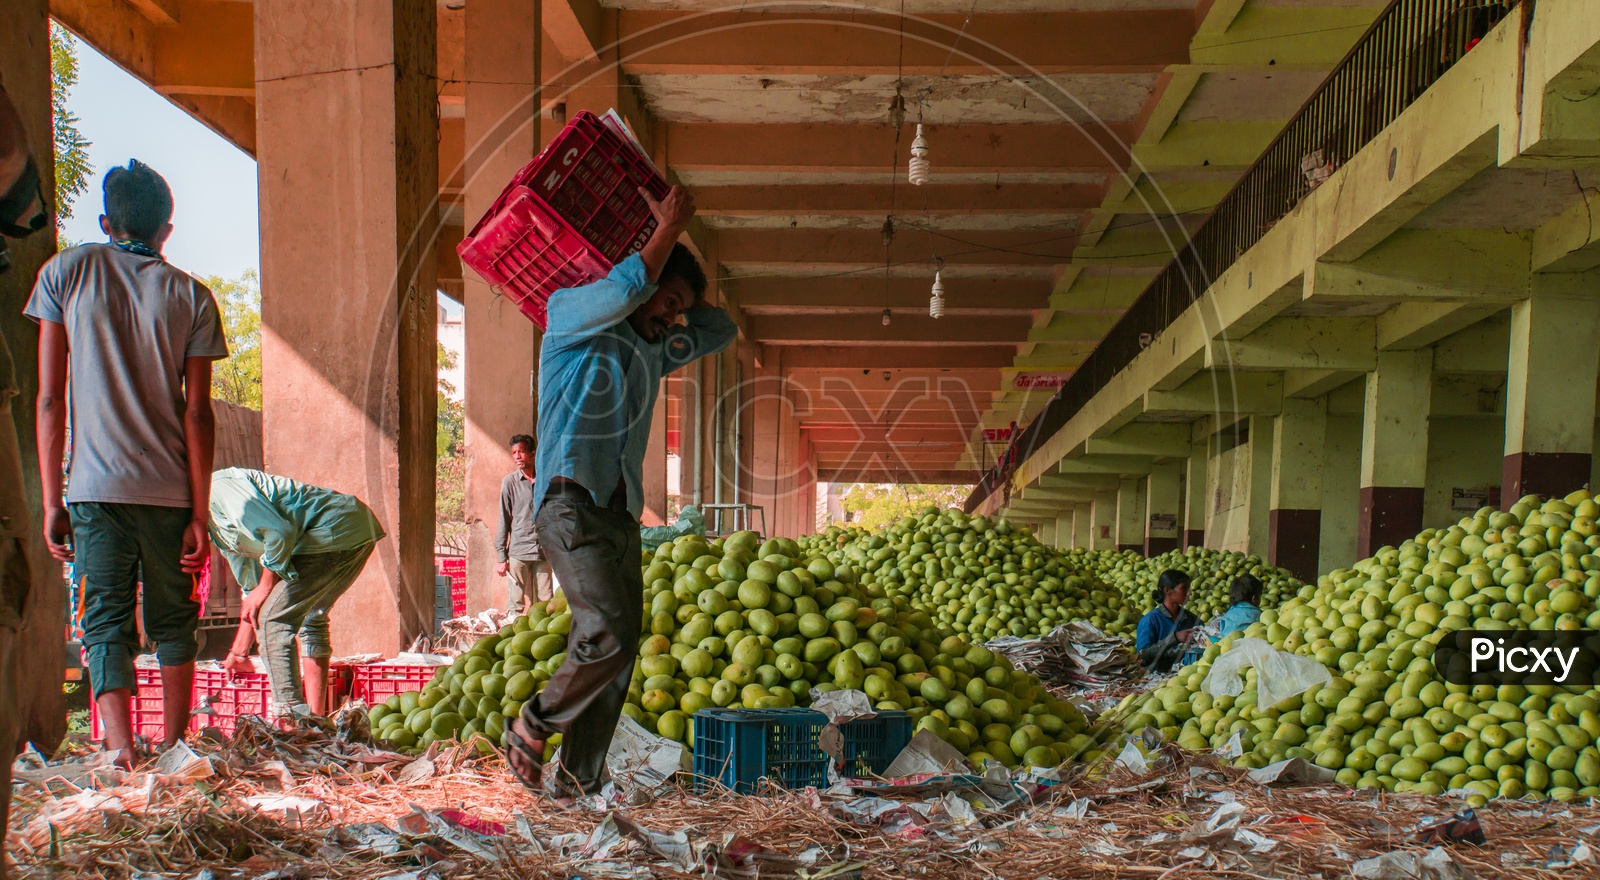 View of mangoes and seller in the market